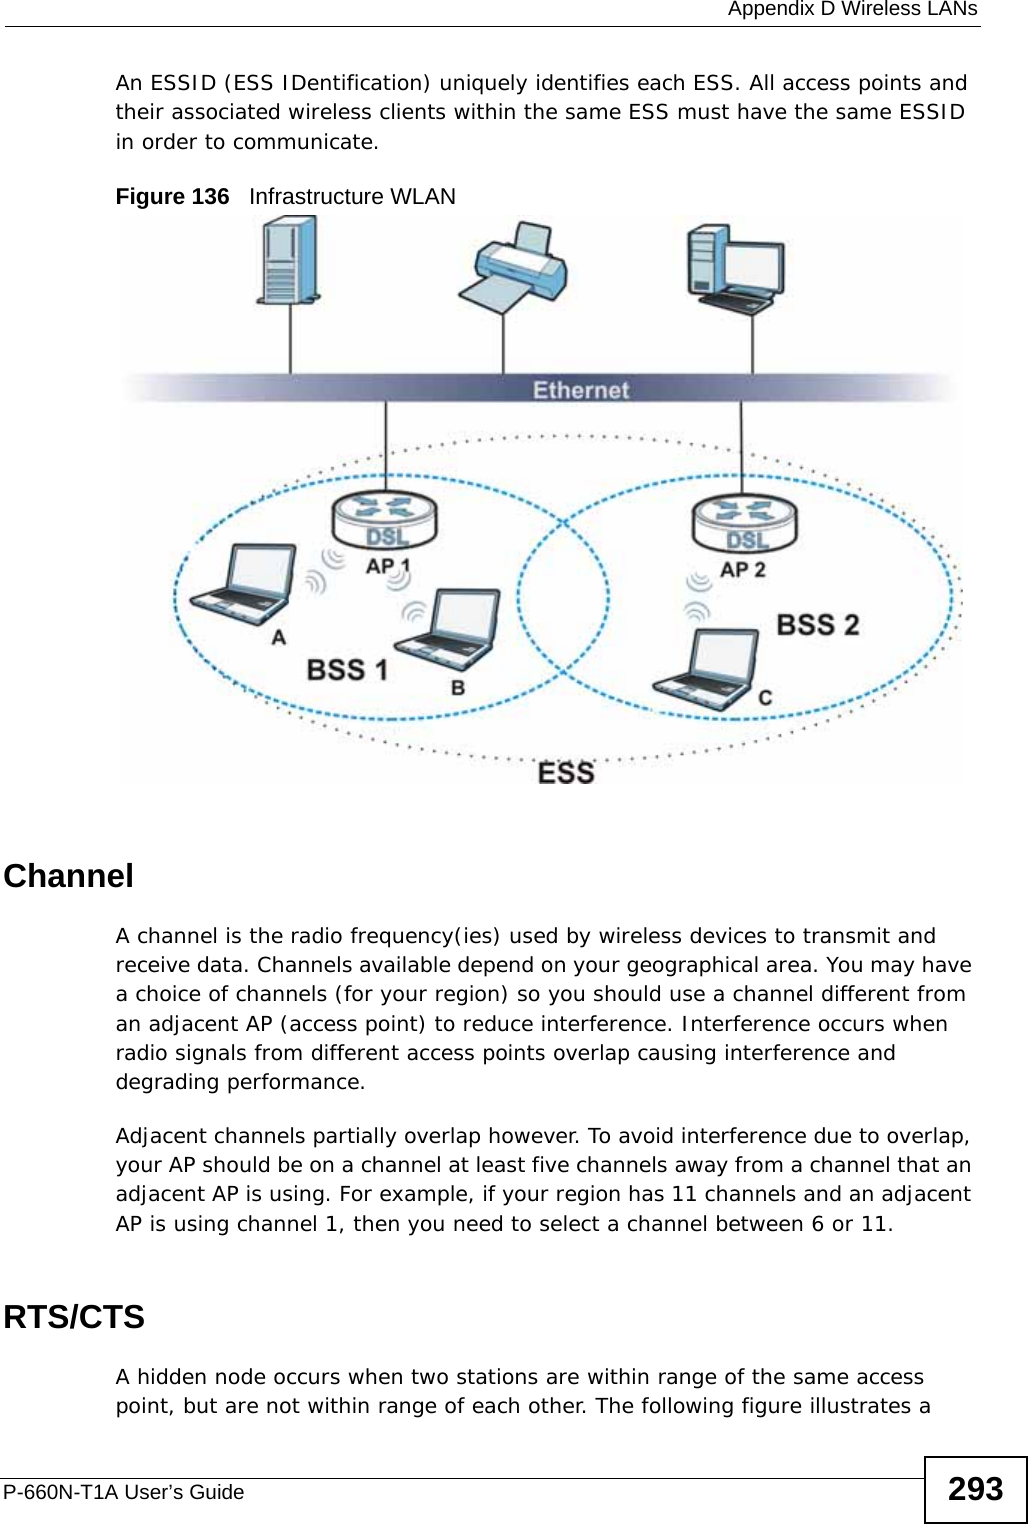  Appendix D Wireless LANsP-660N-T1A User’s Guide 293An ESSID (ESS IDentification) uniquely identifies each ESS. All access points and their associated wireless clients within the same ESS must have the same ESSID in order to communicate.Figure 136   Infrastructure WLANChannelA channel is the radio frequency(ies) used by wireless devices to transmit and receive data. Channels available depend on your geographical area. You may have a choice of channels (for your region) so you should use a channel different from an adjacent AP (access point) to reduce interference. Interference occurs when radio signals from different access points overlap causing interference and degrading performance.Adjacent channels partially overlap however. To avoid interference due to overlap, your AP should be on a channel at least five channels away from a channel that an adjacent AP is using. For example, if your region has 11 channels and an adjacent AP is using channel 1, then you need to select a channel between 6 or 11.RTS/CTSA hidden node occurs when two stations are within range of the same access point, but are not within range of each other. The following figure illustrates a 